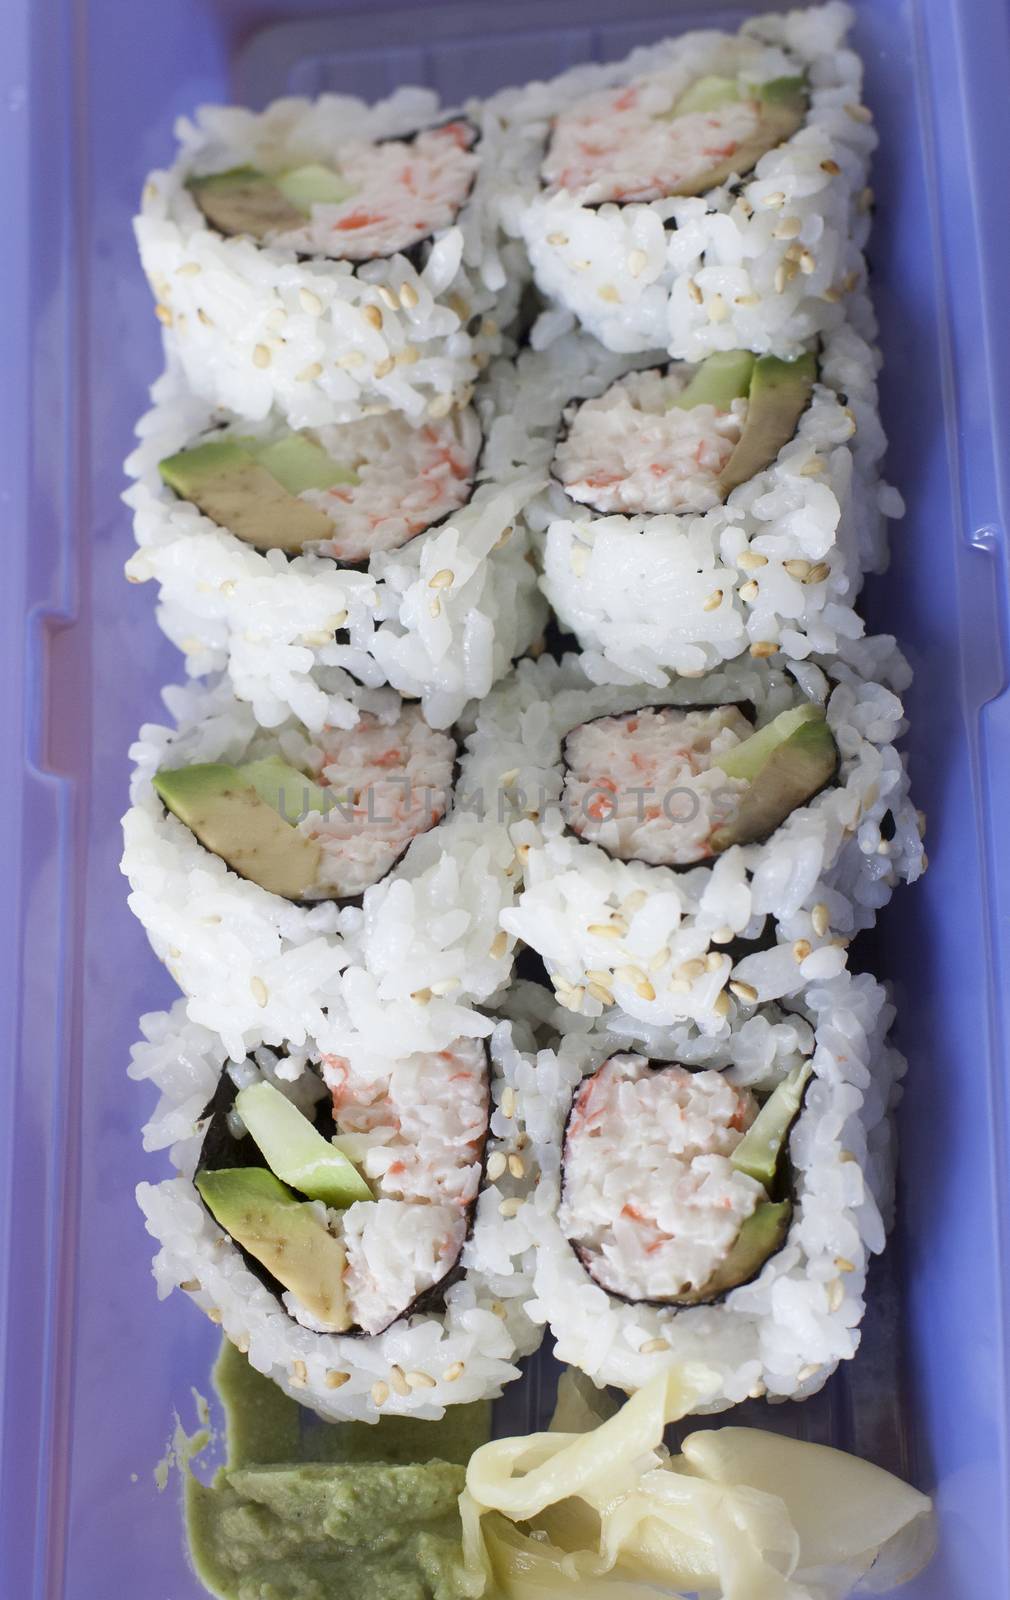 Two rolls of California sushi plated with wasabi sauce and ginger